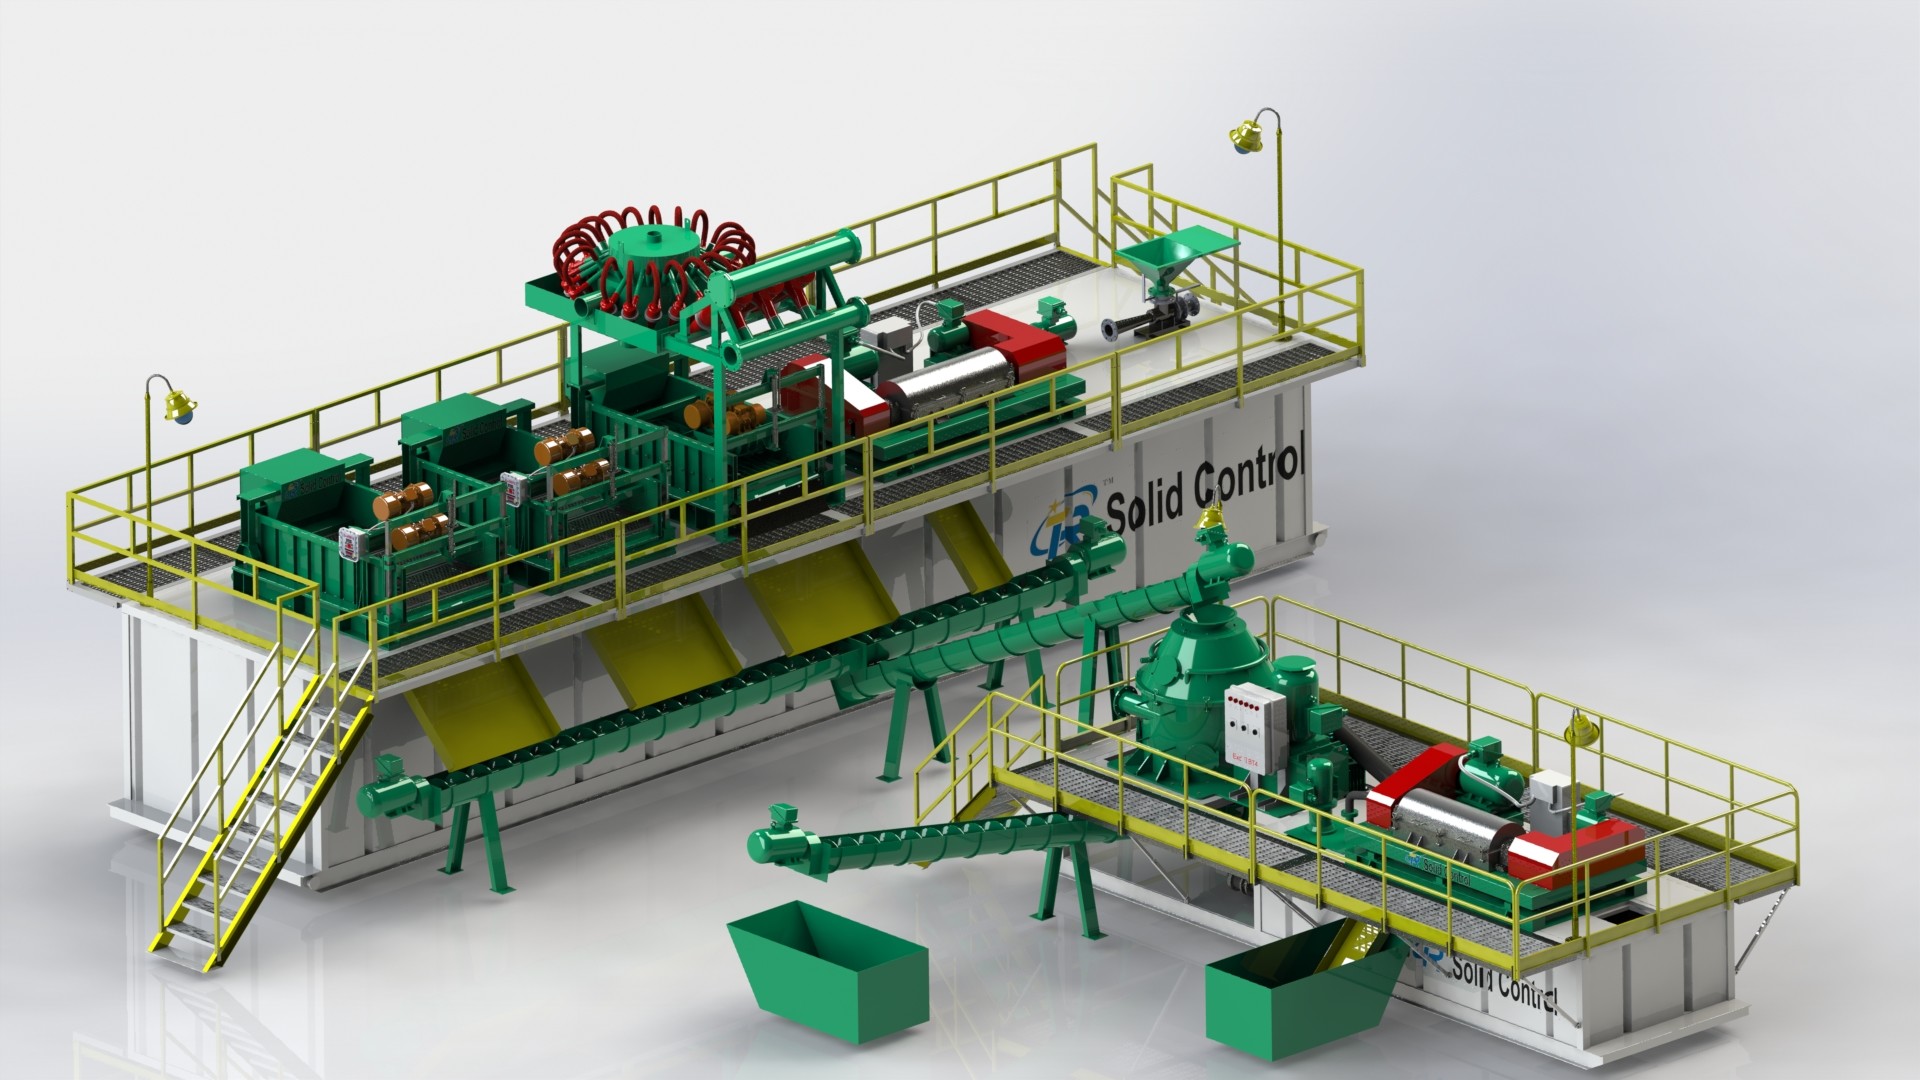 China CBM Solids Control drilling mud fluid waste recovery management